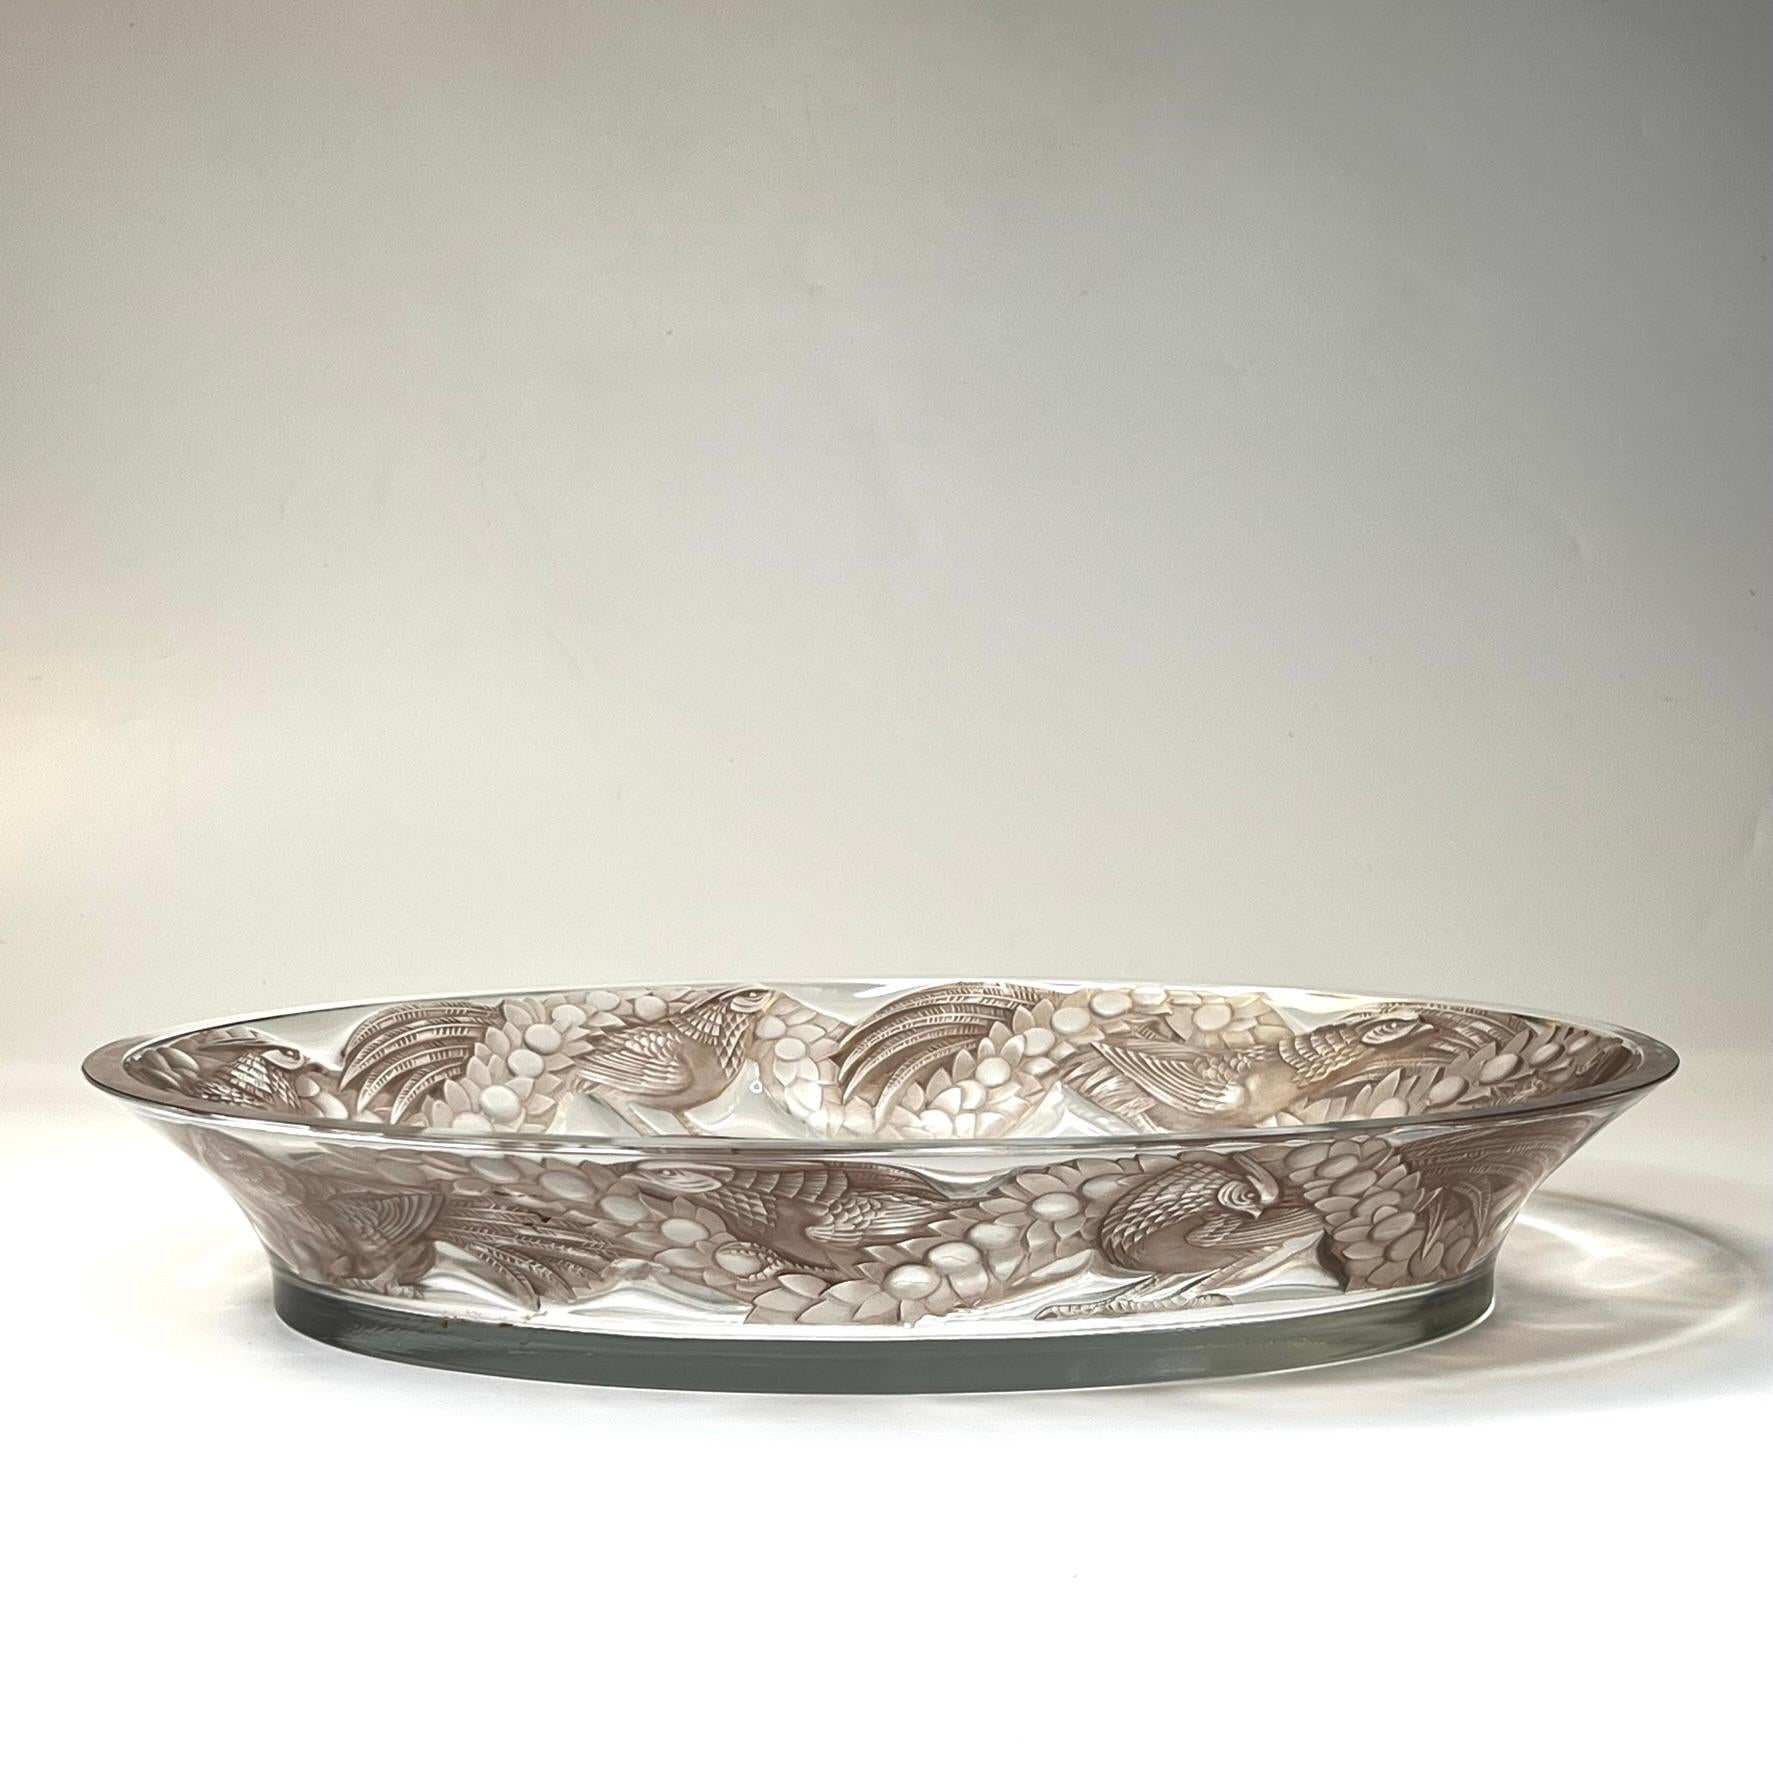 Our glass platter from Lalique, circa 1930, is known as the Faisons design, depicting pheasants in the Art Deco style in sepia colored glass over clear.